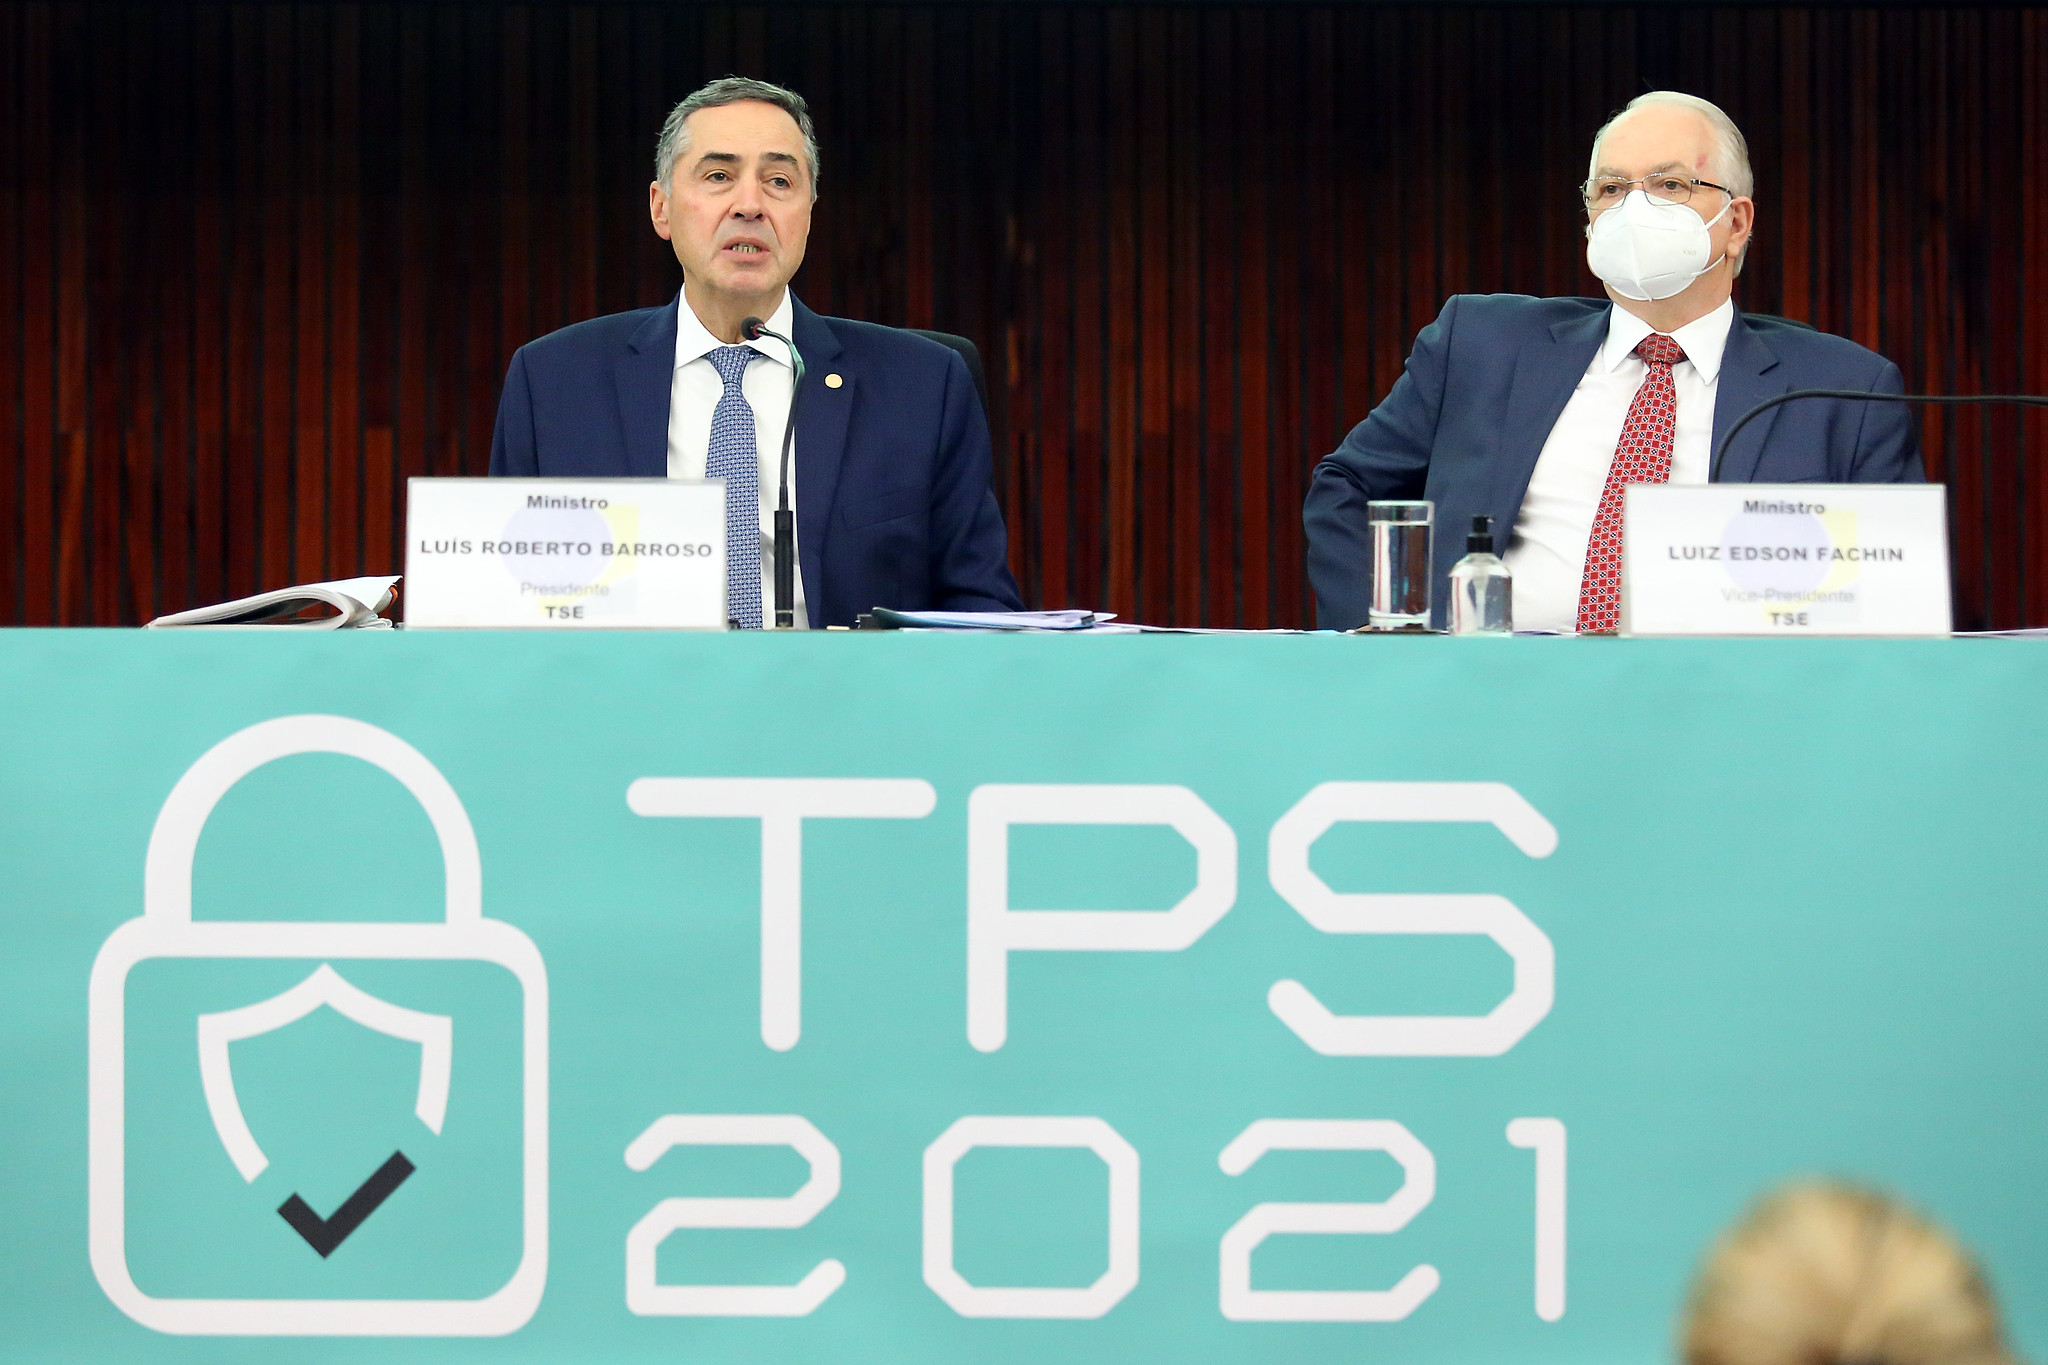 Brazil,Supreme Court Justice and TSE president, Luis Carlos Barroso at the opening of the 2021 TPS event.